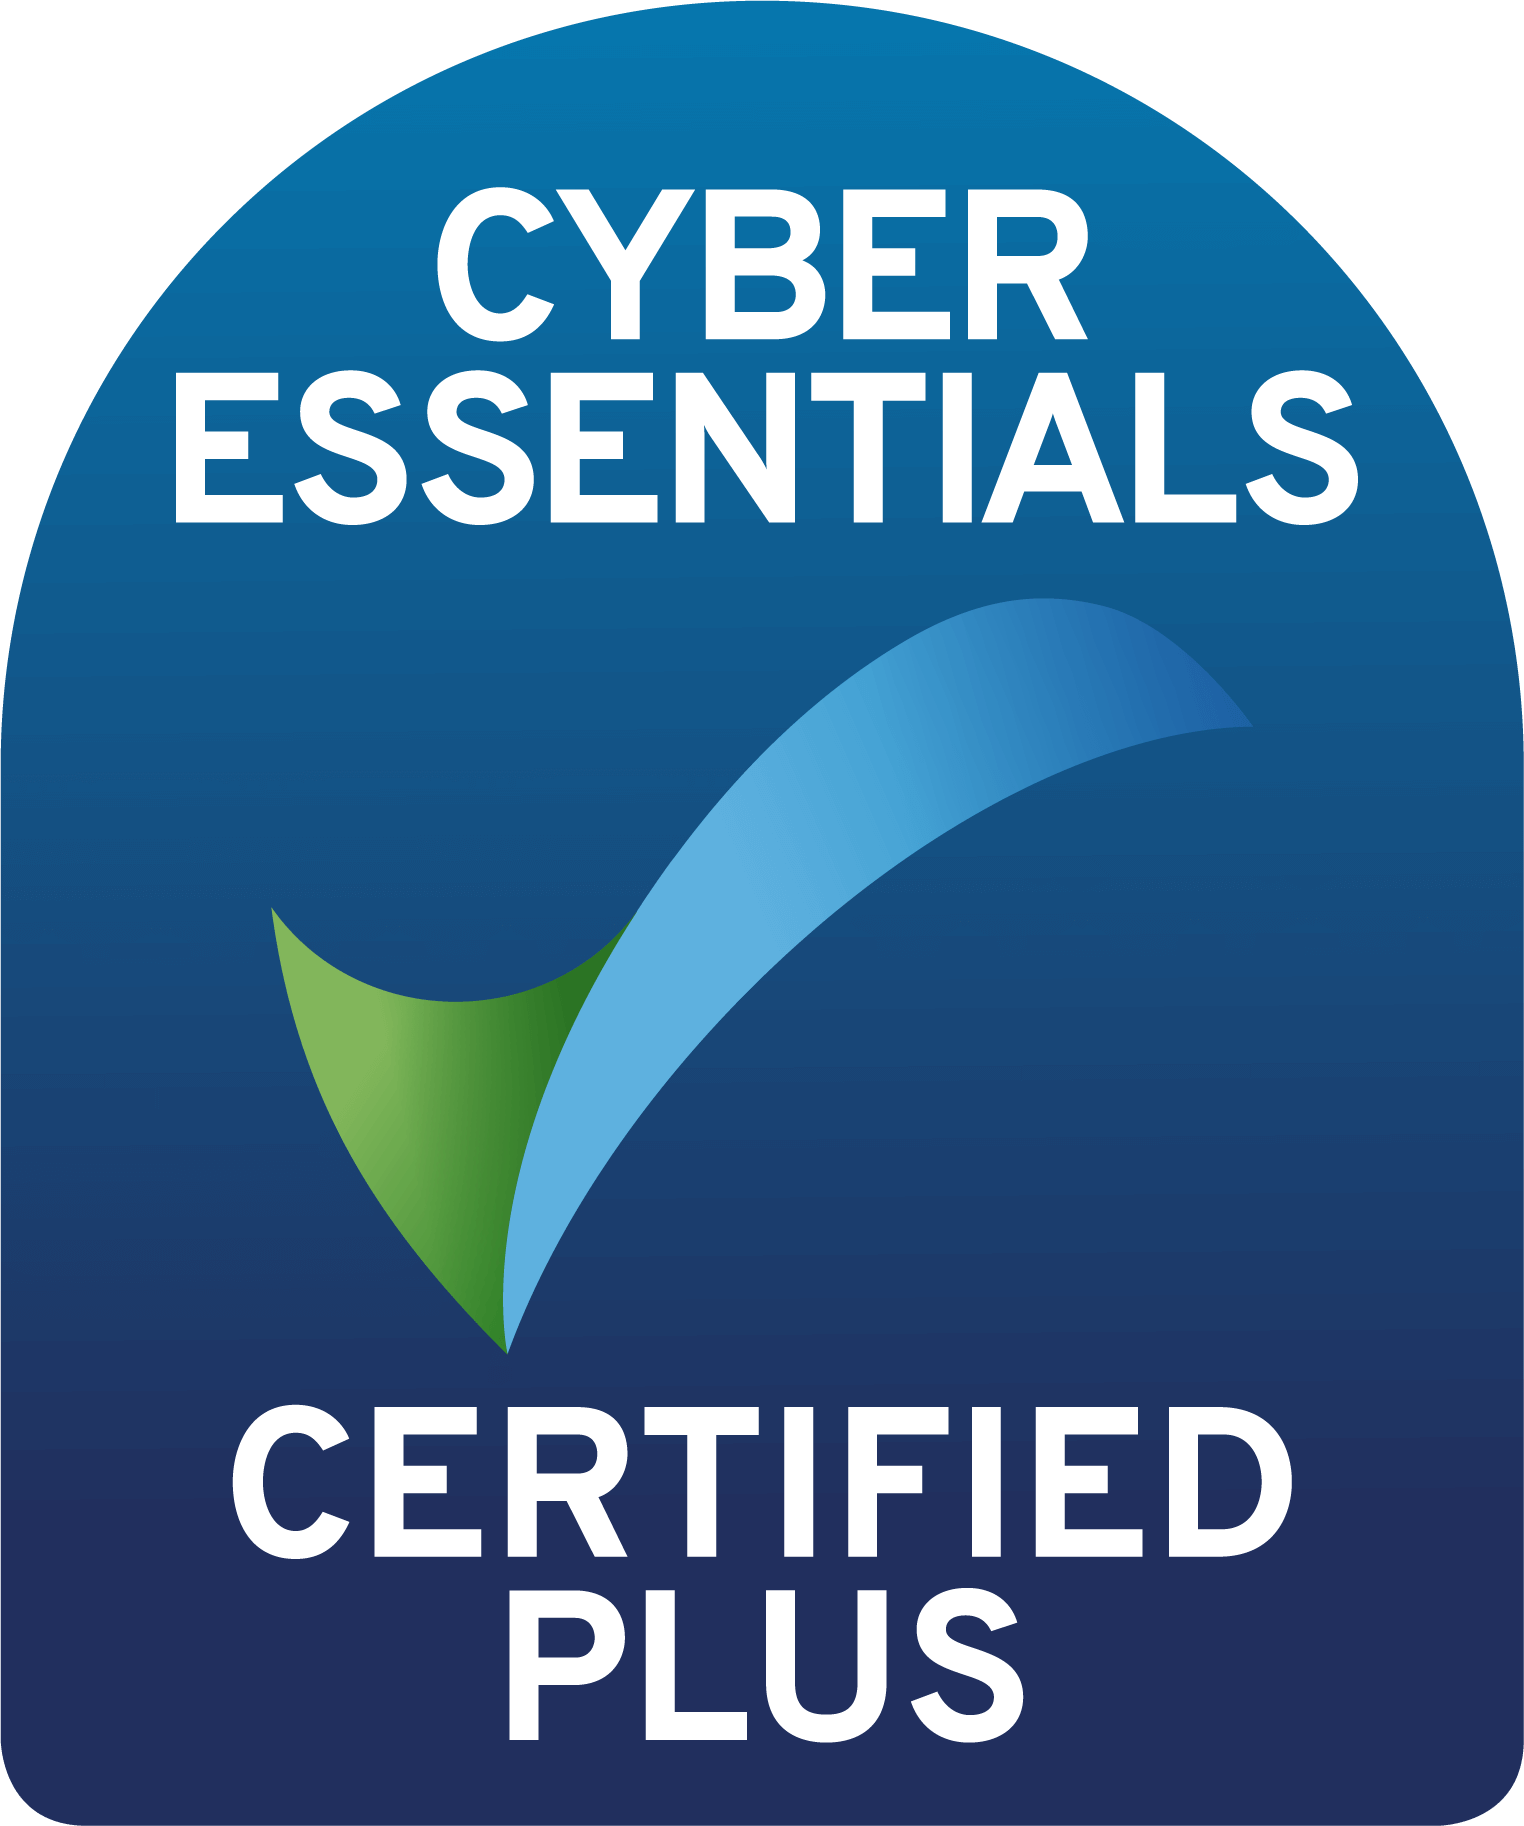 A certification of Symbiant for Cyber Essentials Certified Plus